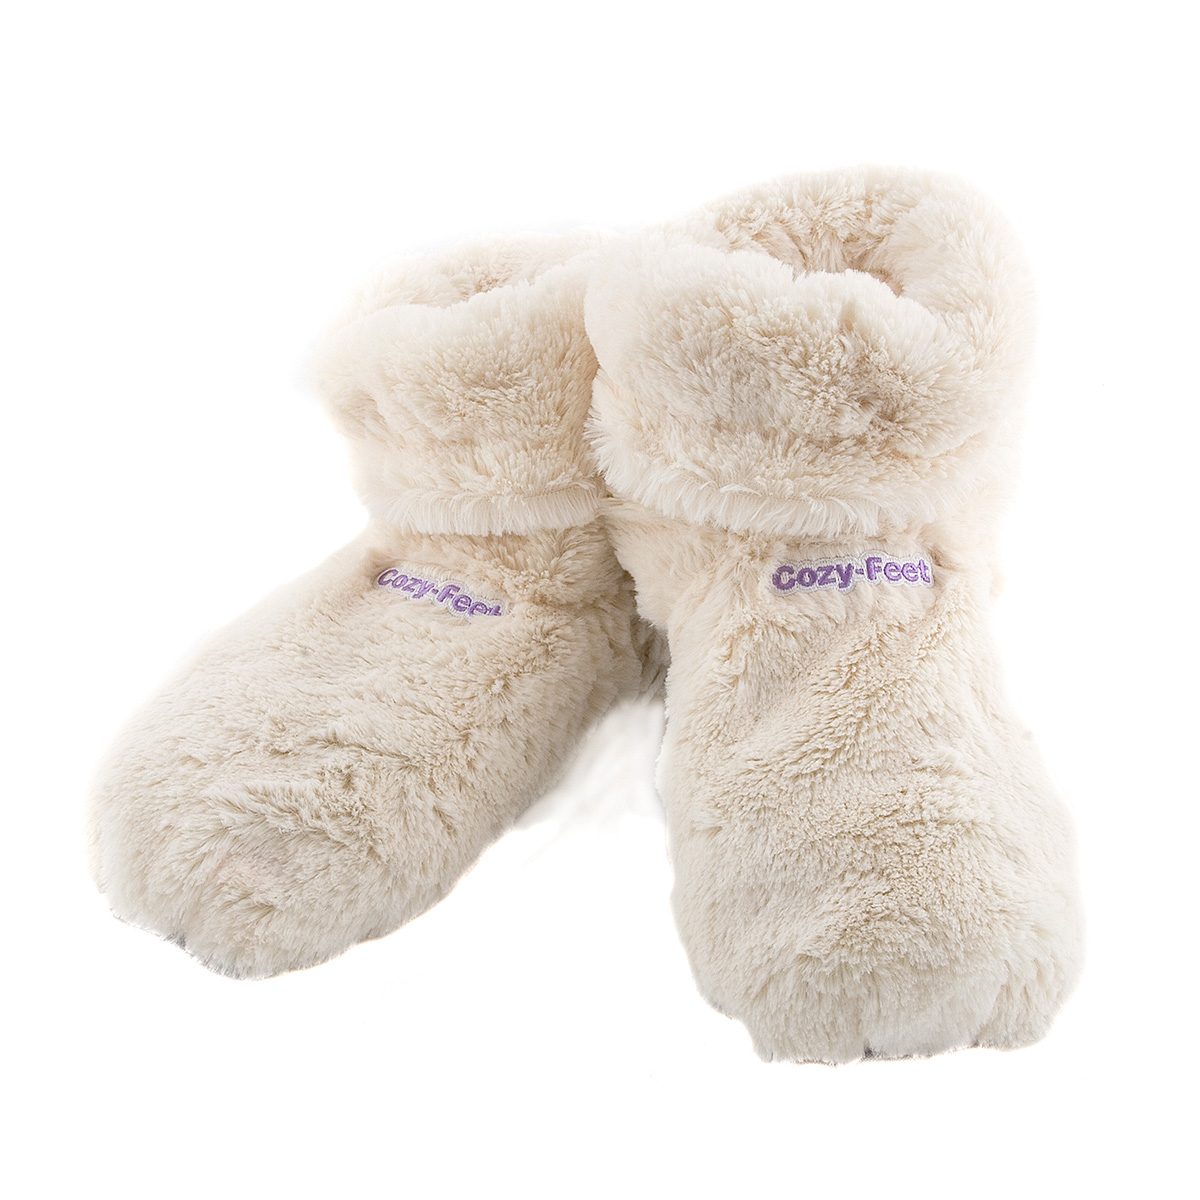 Cozy Boots Cream Microwavable Slipper Boots - Mother's Day